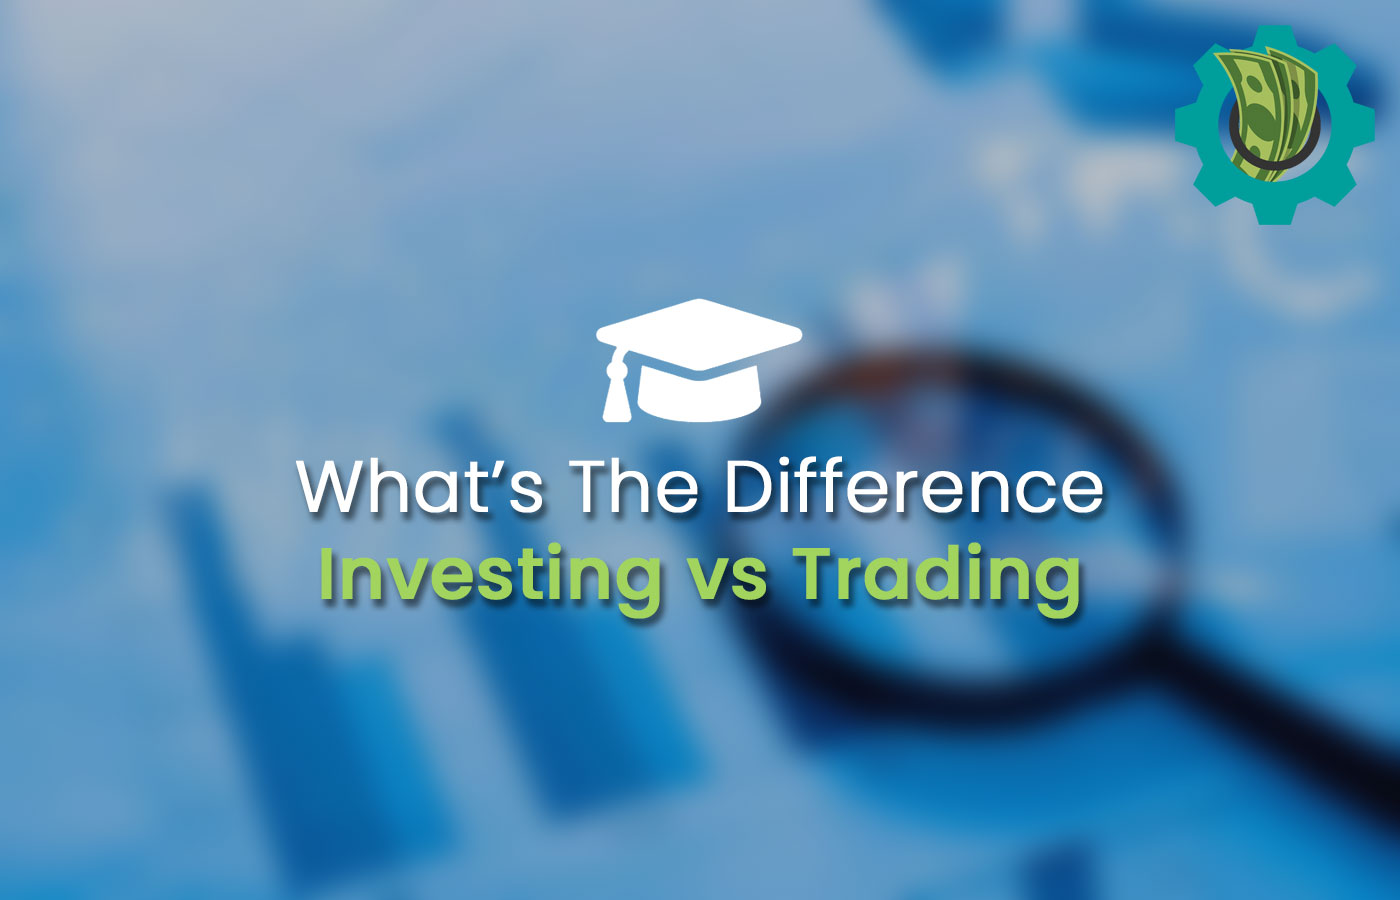 Analyst explaining the difference between investing and trading